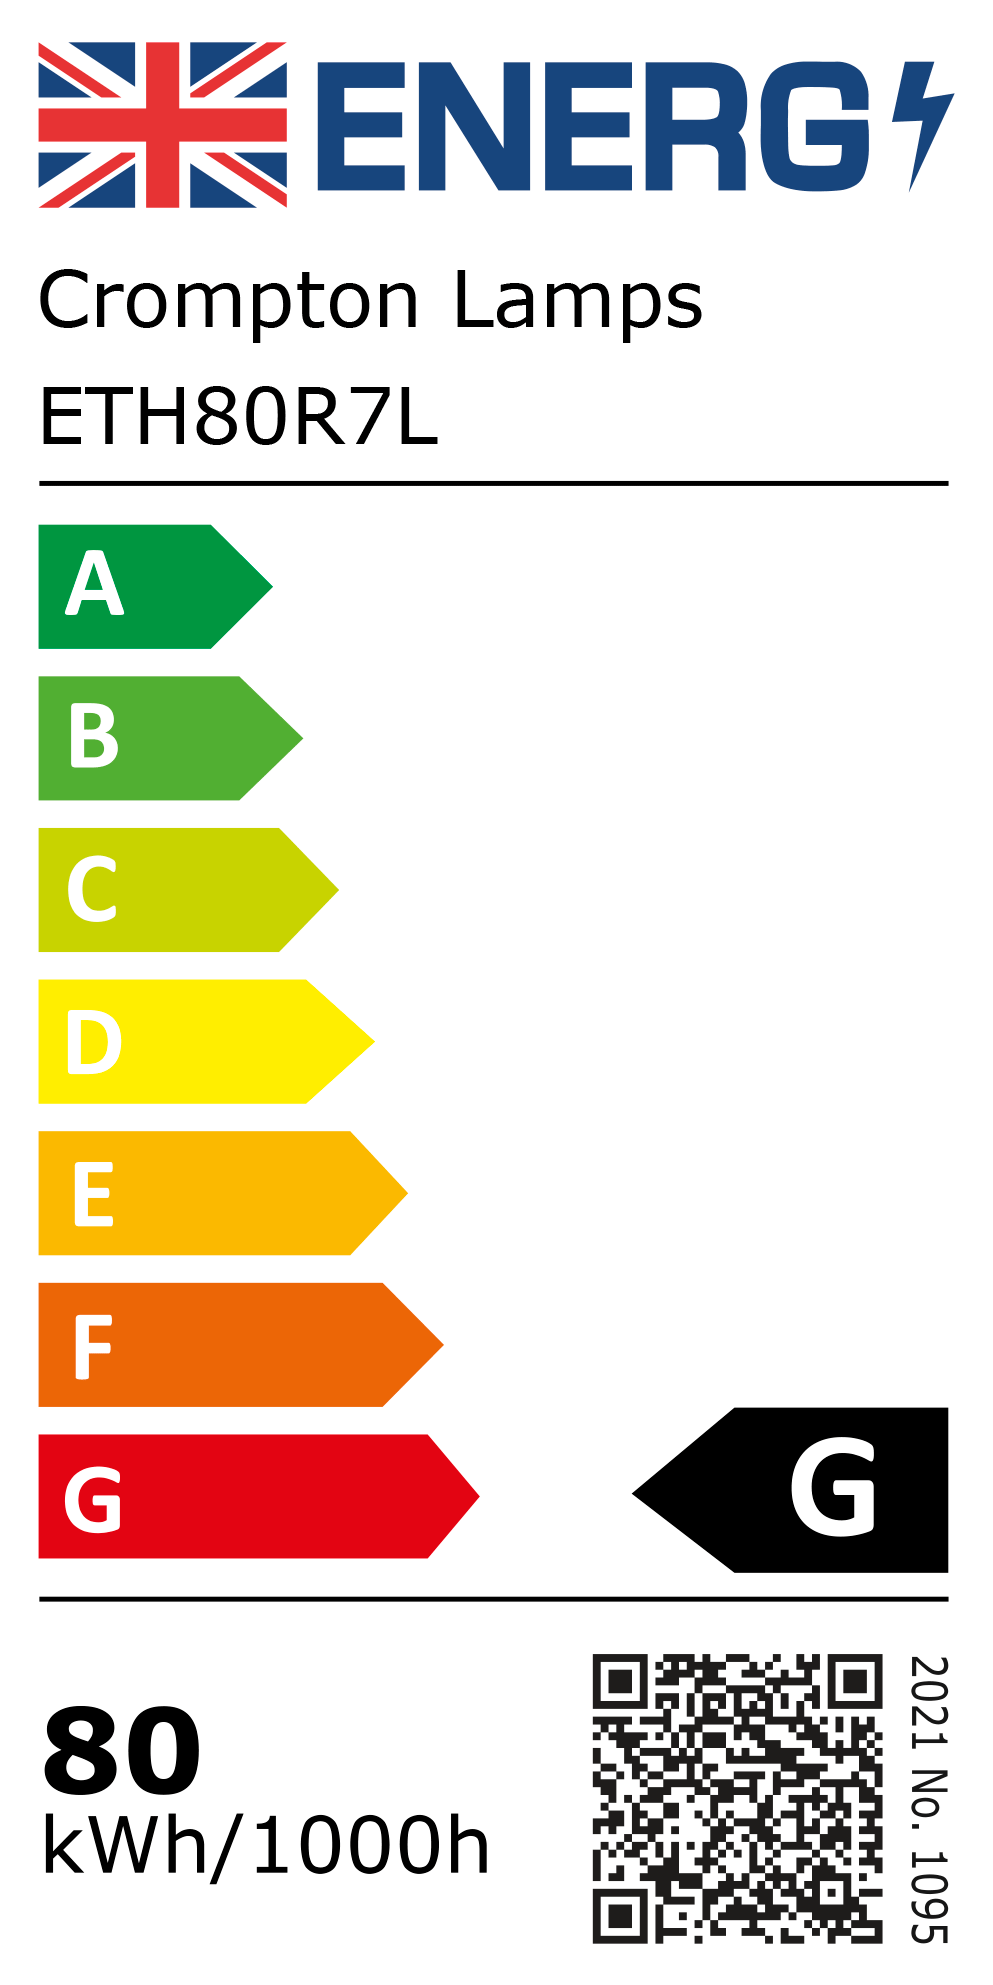 New 2021 Energy Rating Label: Stock Code ETH80R7L